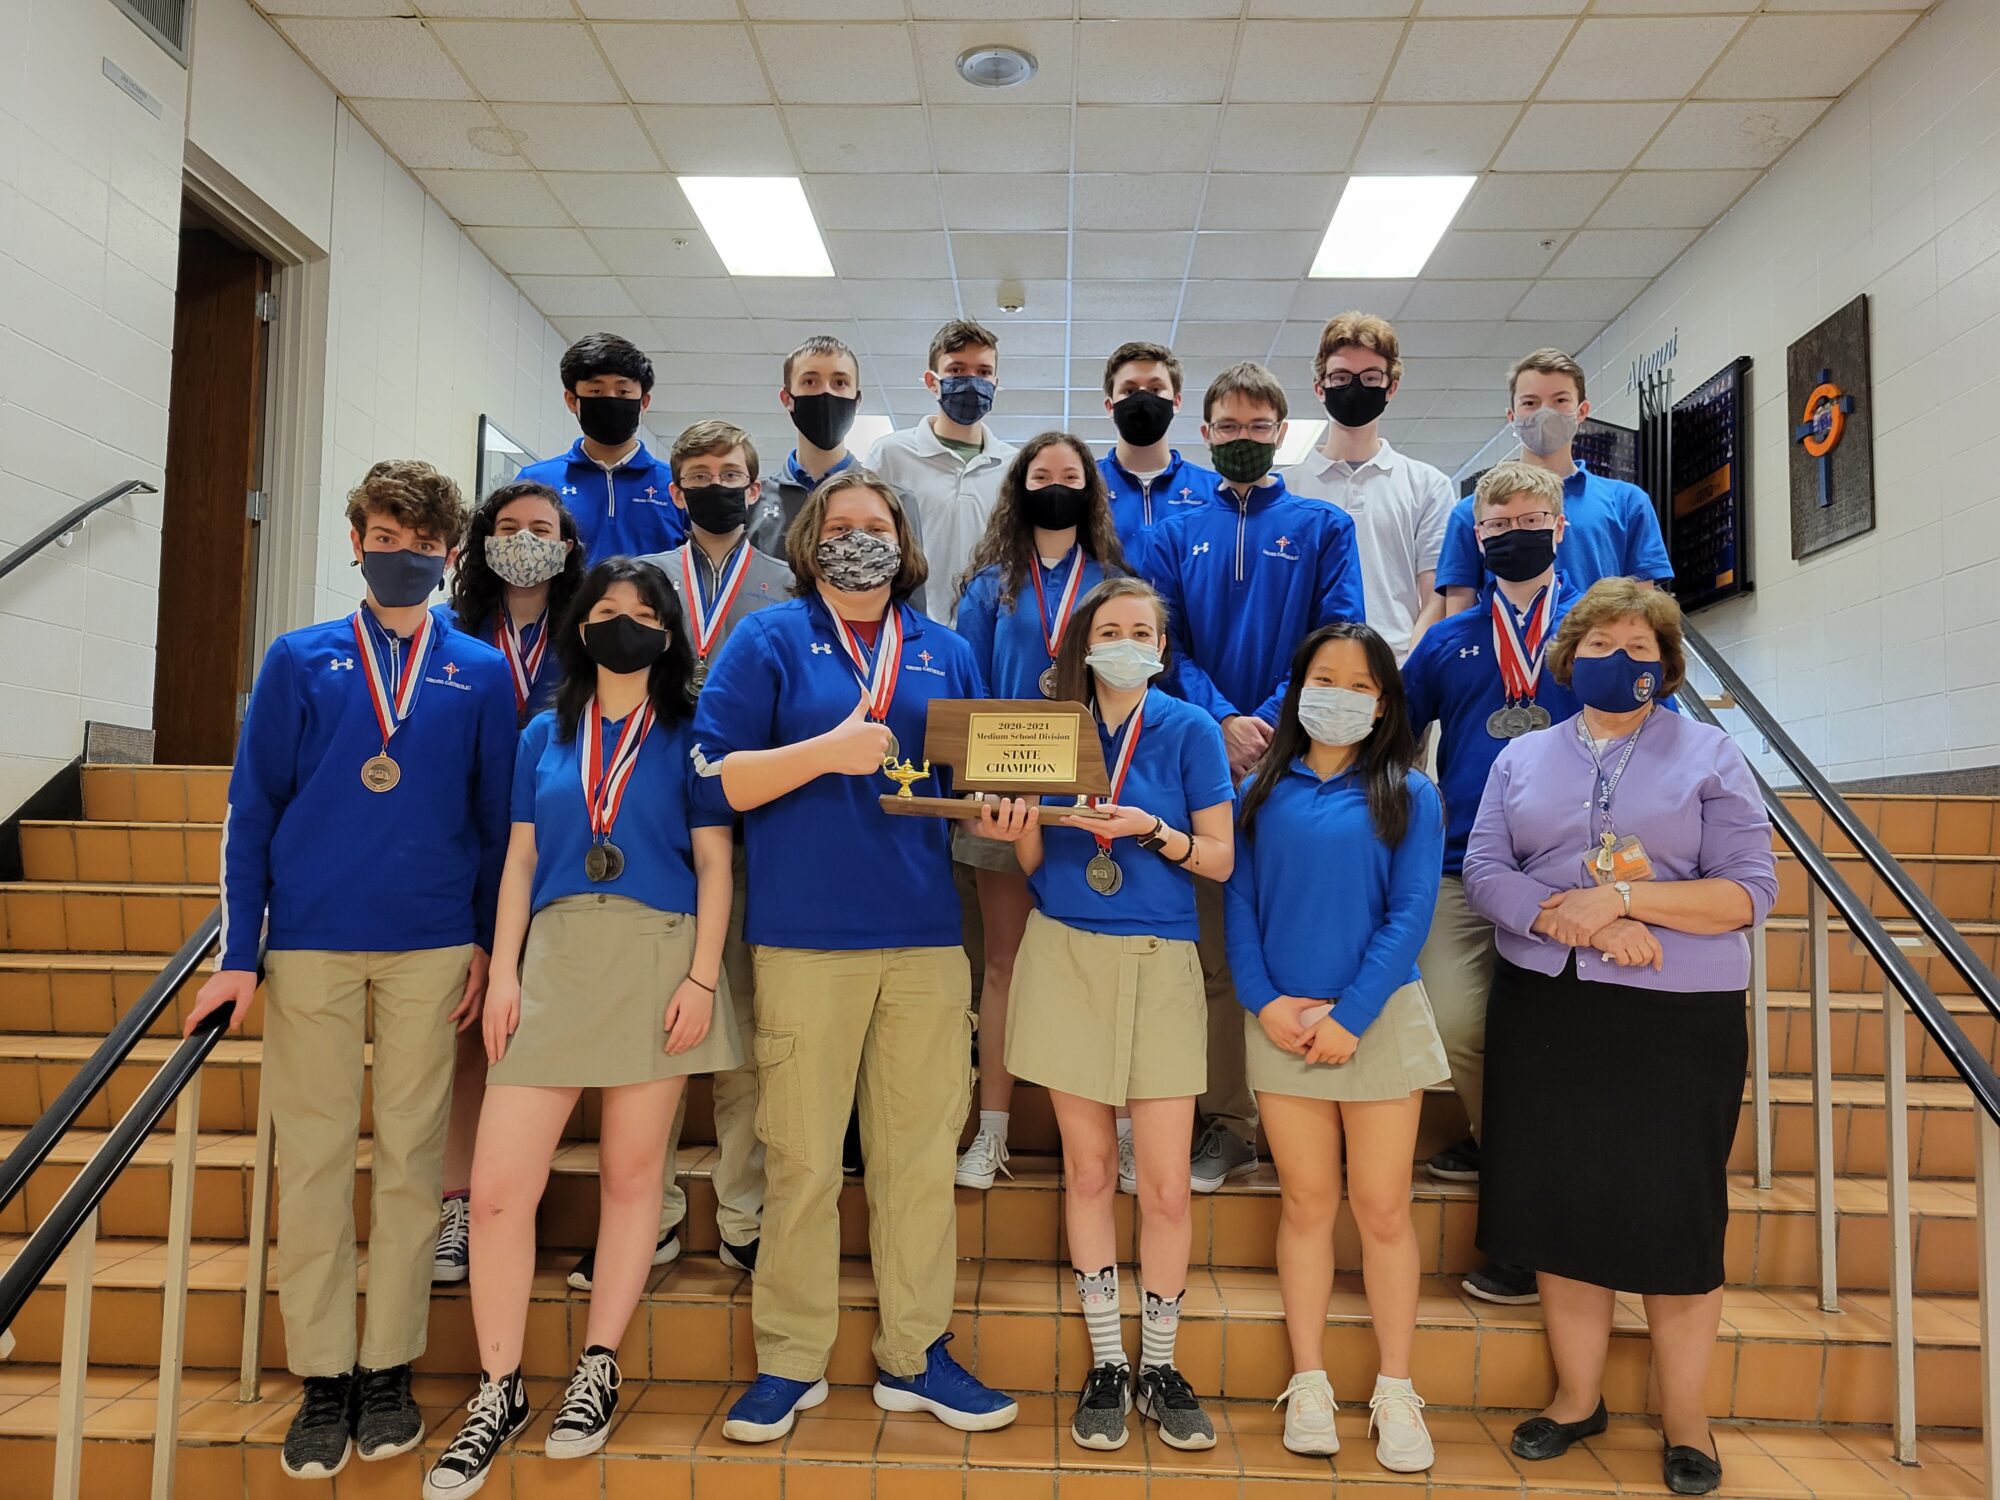 St. Lawrence School victorious in academic decathlon – Daily Breeze